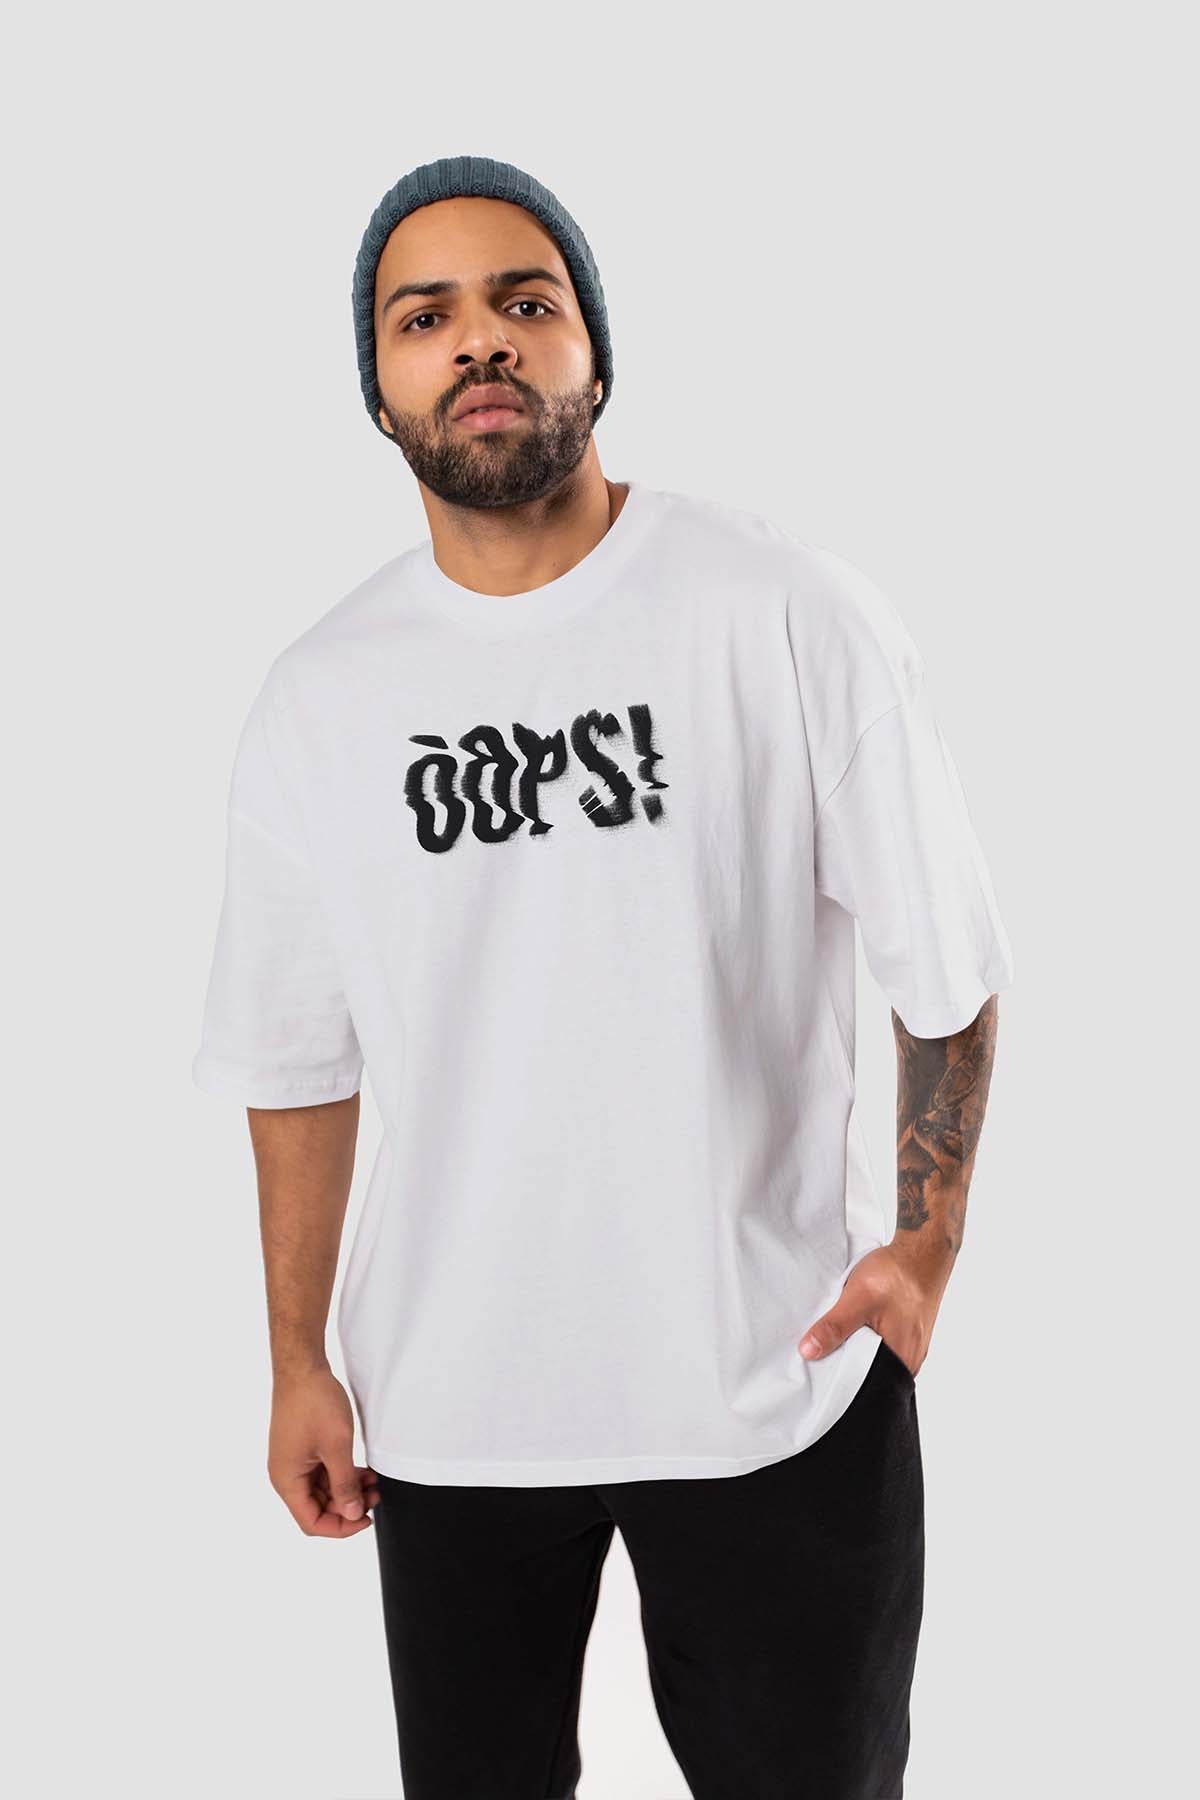 Oops! Urban Fit Oversized T-shirt - keos.life